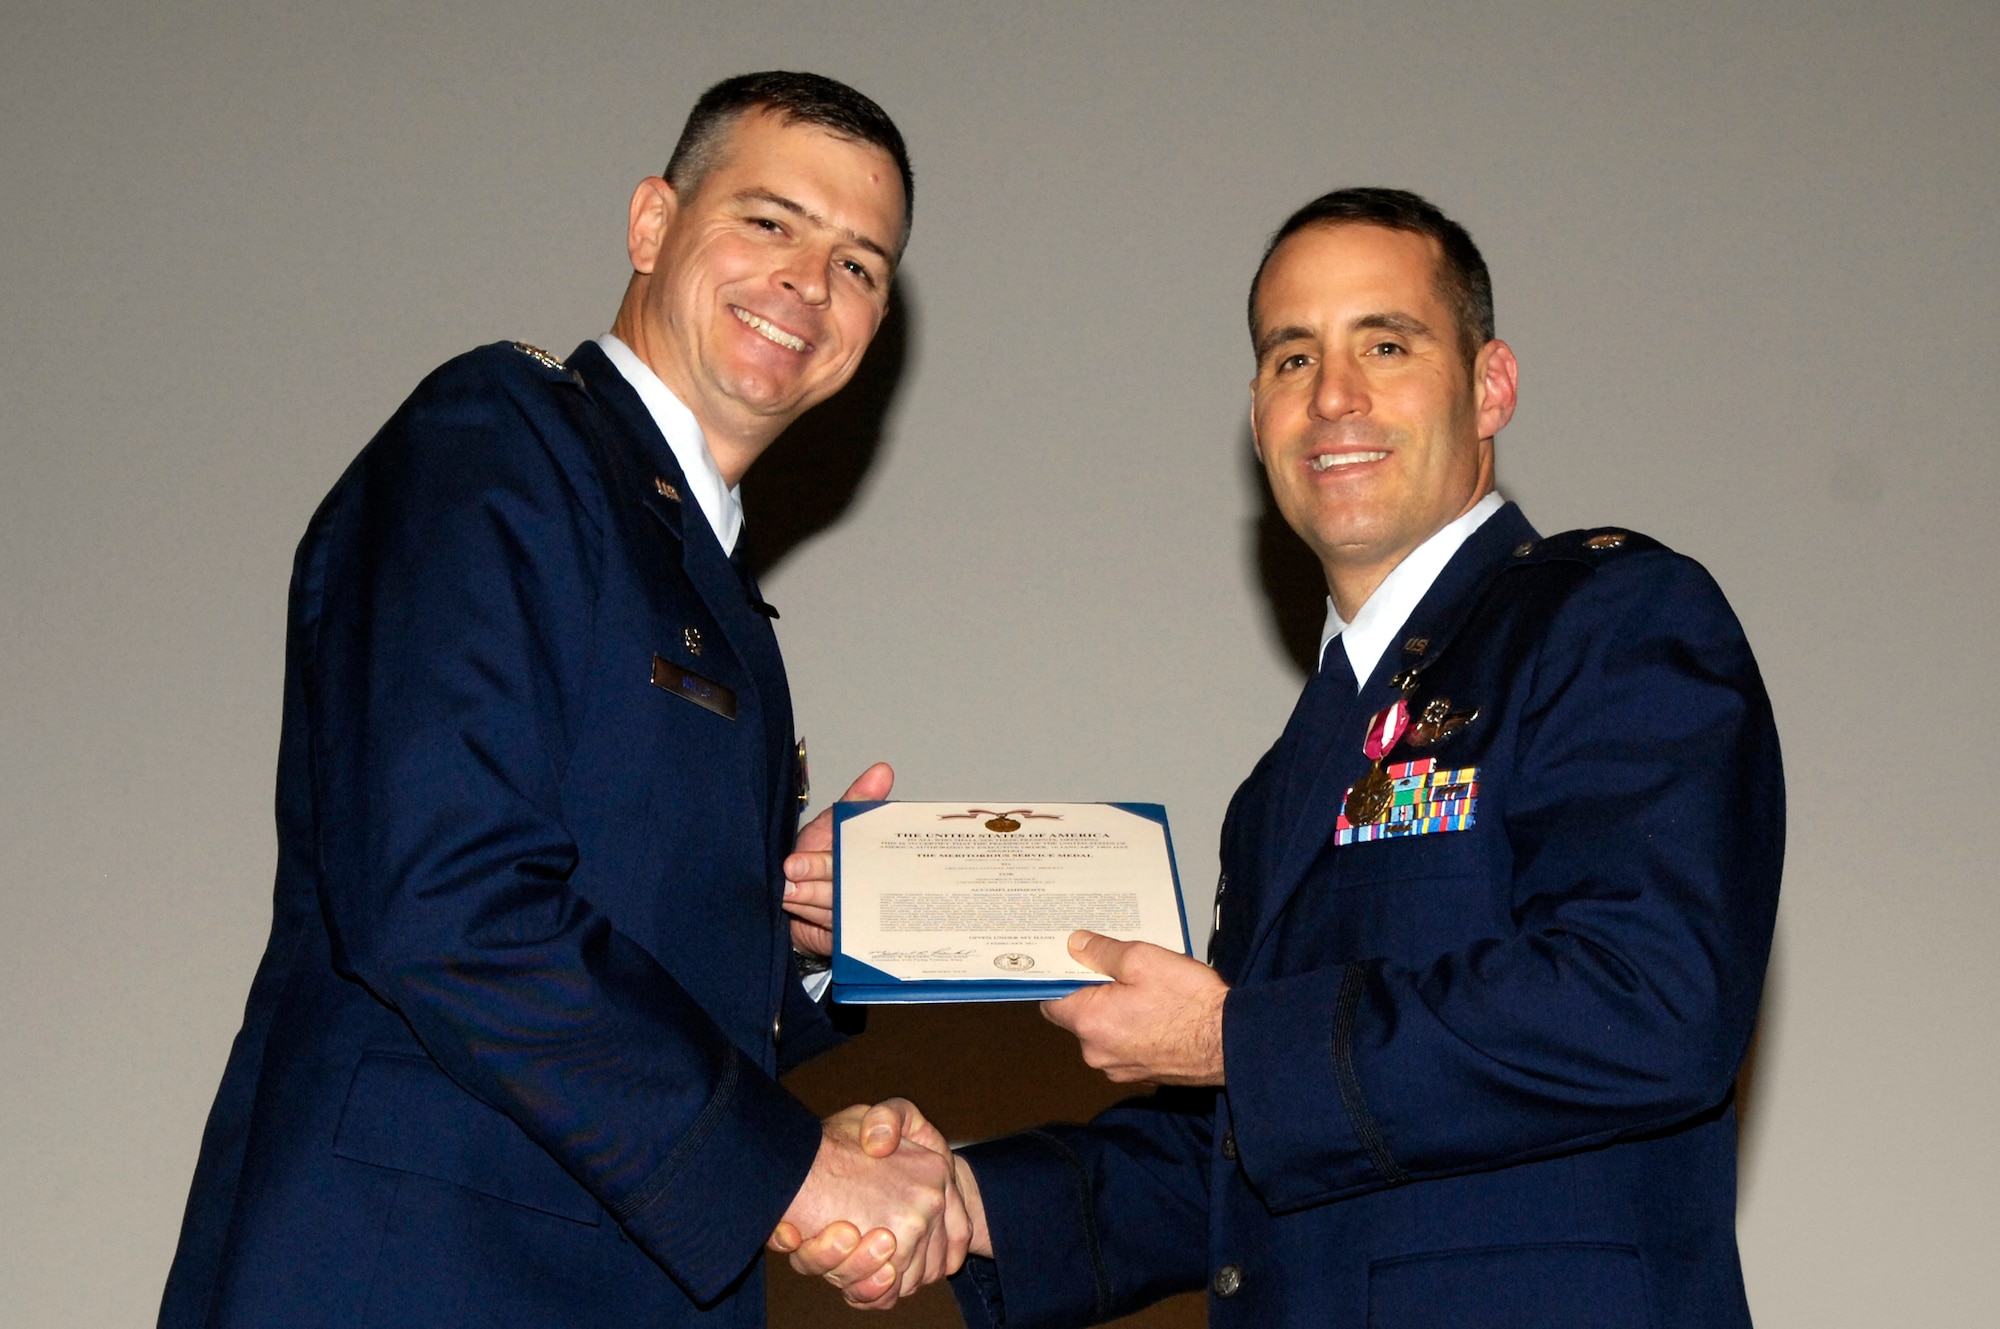 LAUGHLIN AIR FORCE BASE, Texas – Col. Craig Wills, 47th Operations Group commander, congratulates Lt. Col. Michael Brockey, the new 47th OG deputy commander, on achieving a Meritorious Service Medal for his service as the 47th Operations Support Squadron commander. Lieutenant Col. Brockey’s command was assumed by Lt. Col. John Binder, 47th OSS commander, Feb. 11. (U.S. Air Force photo by Jose Mendoza)